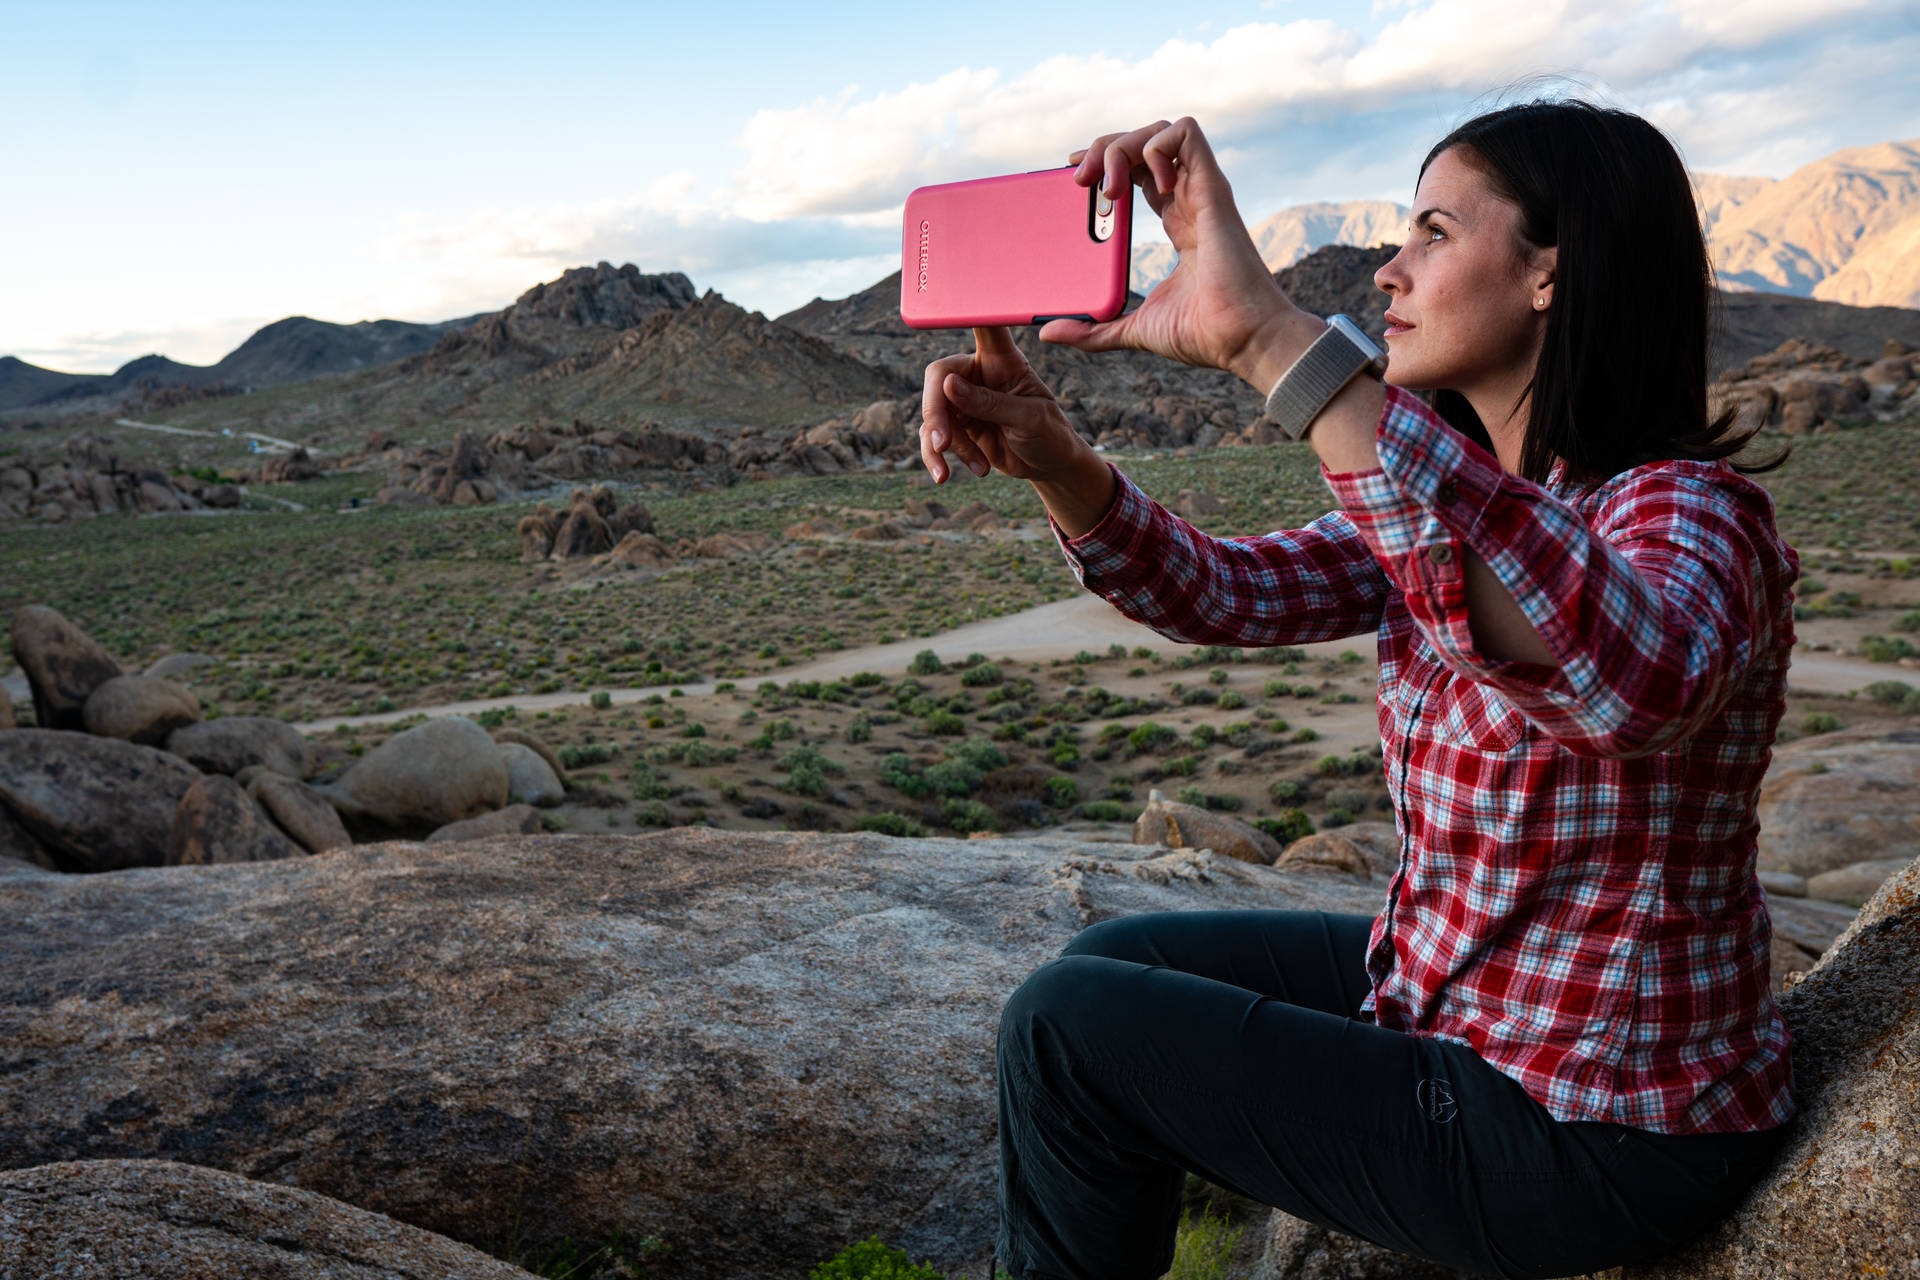 Woman taking landscape photo with her smartphone wallpaper.